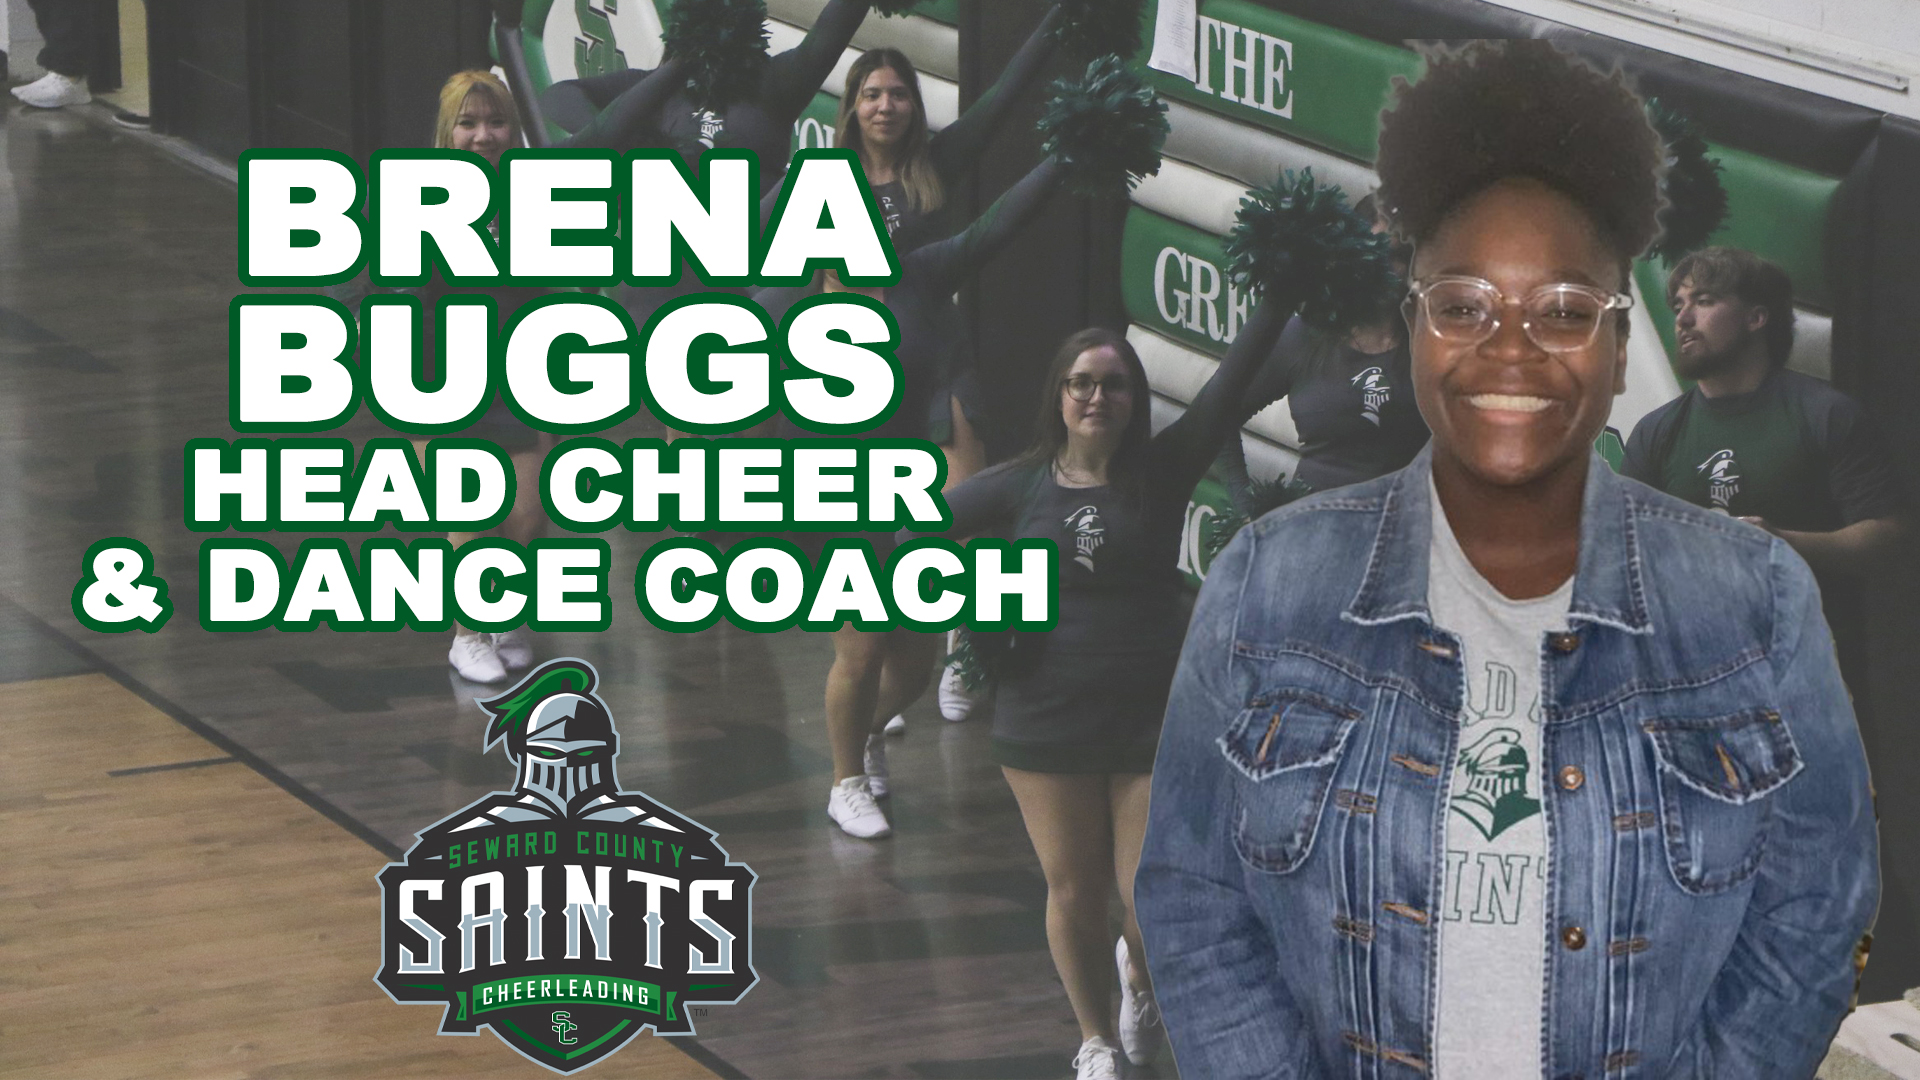 Brena Buggs named the Head Cheer and Dance Coach